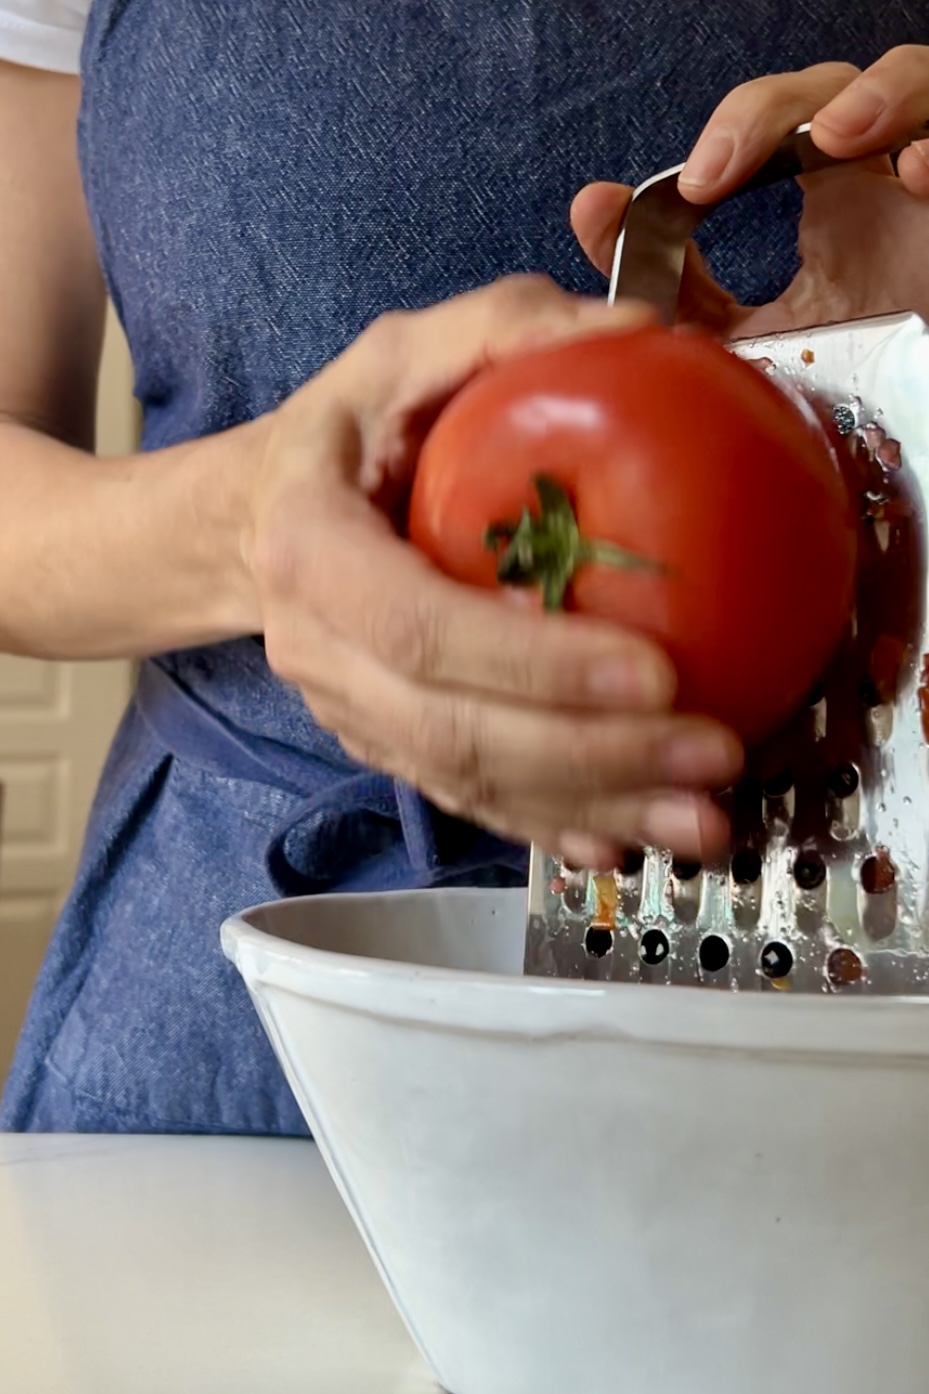 A close-up of a person wearing a blue apron grating a red tomato over a white container, perfect for preparing Pan Con Tomate. The person holds the tomato with their left hand while pressing it against the grater with their right hand. The image focuses on the hands, the tomato, and the grater, with the background slightly blurred.